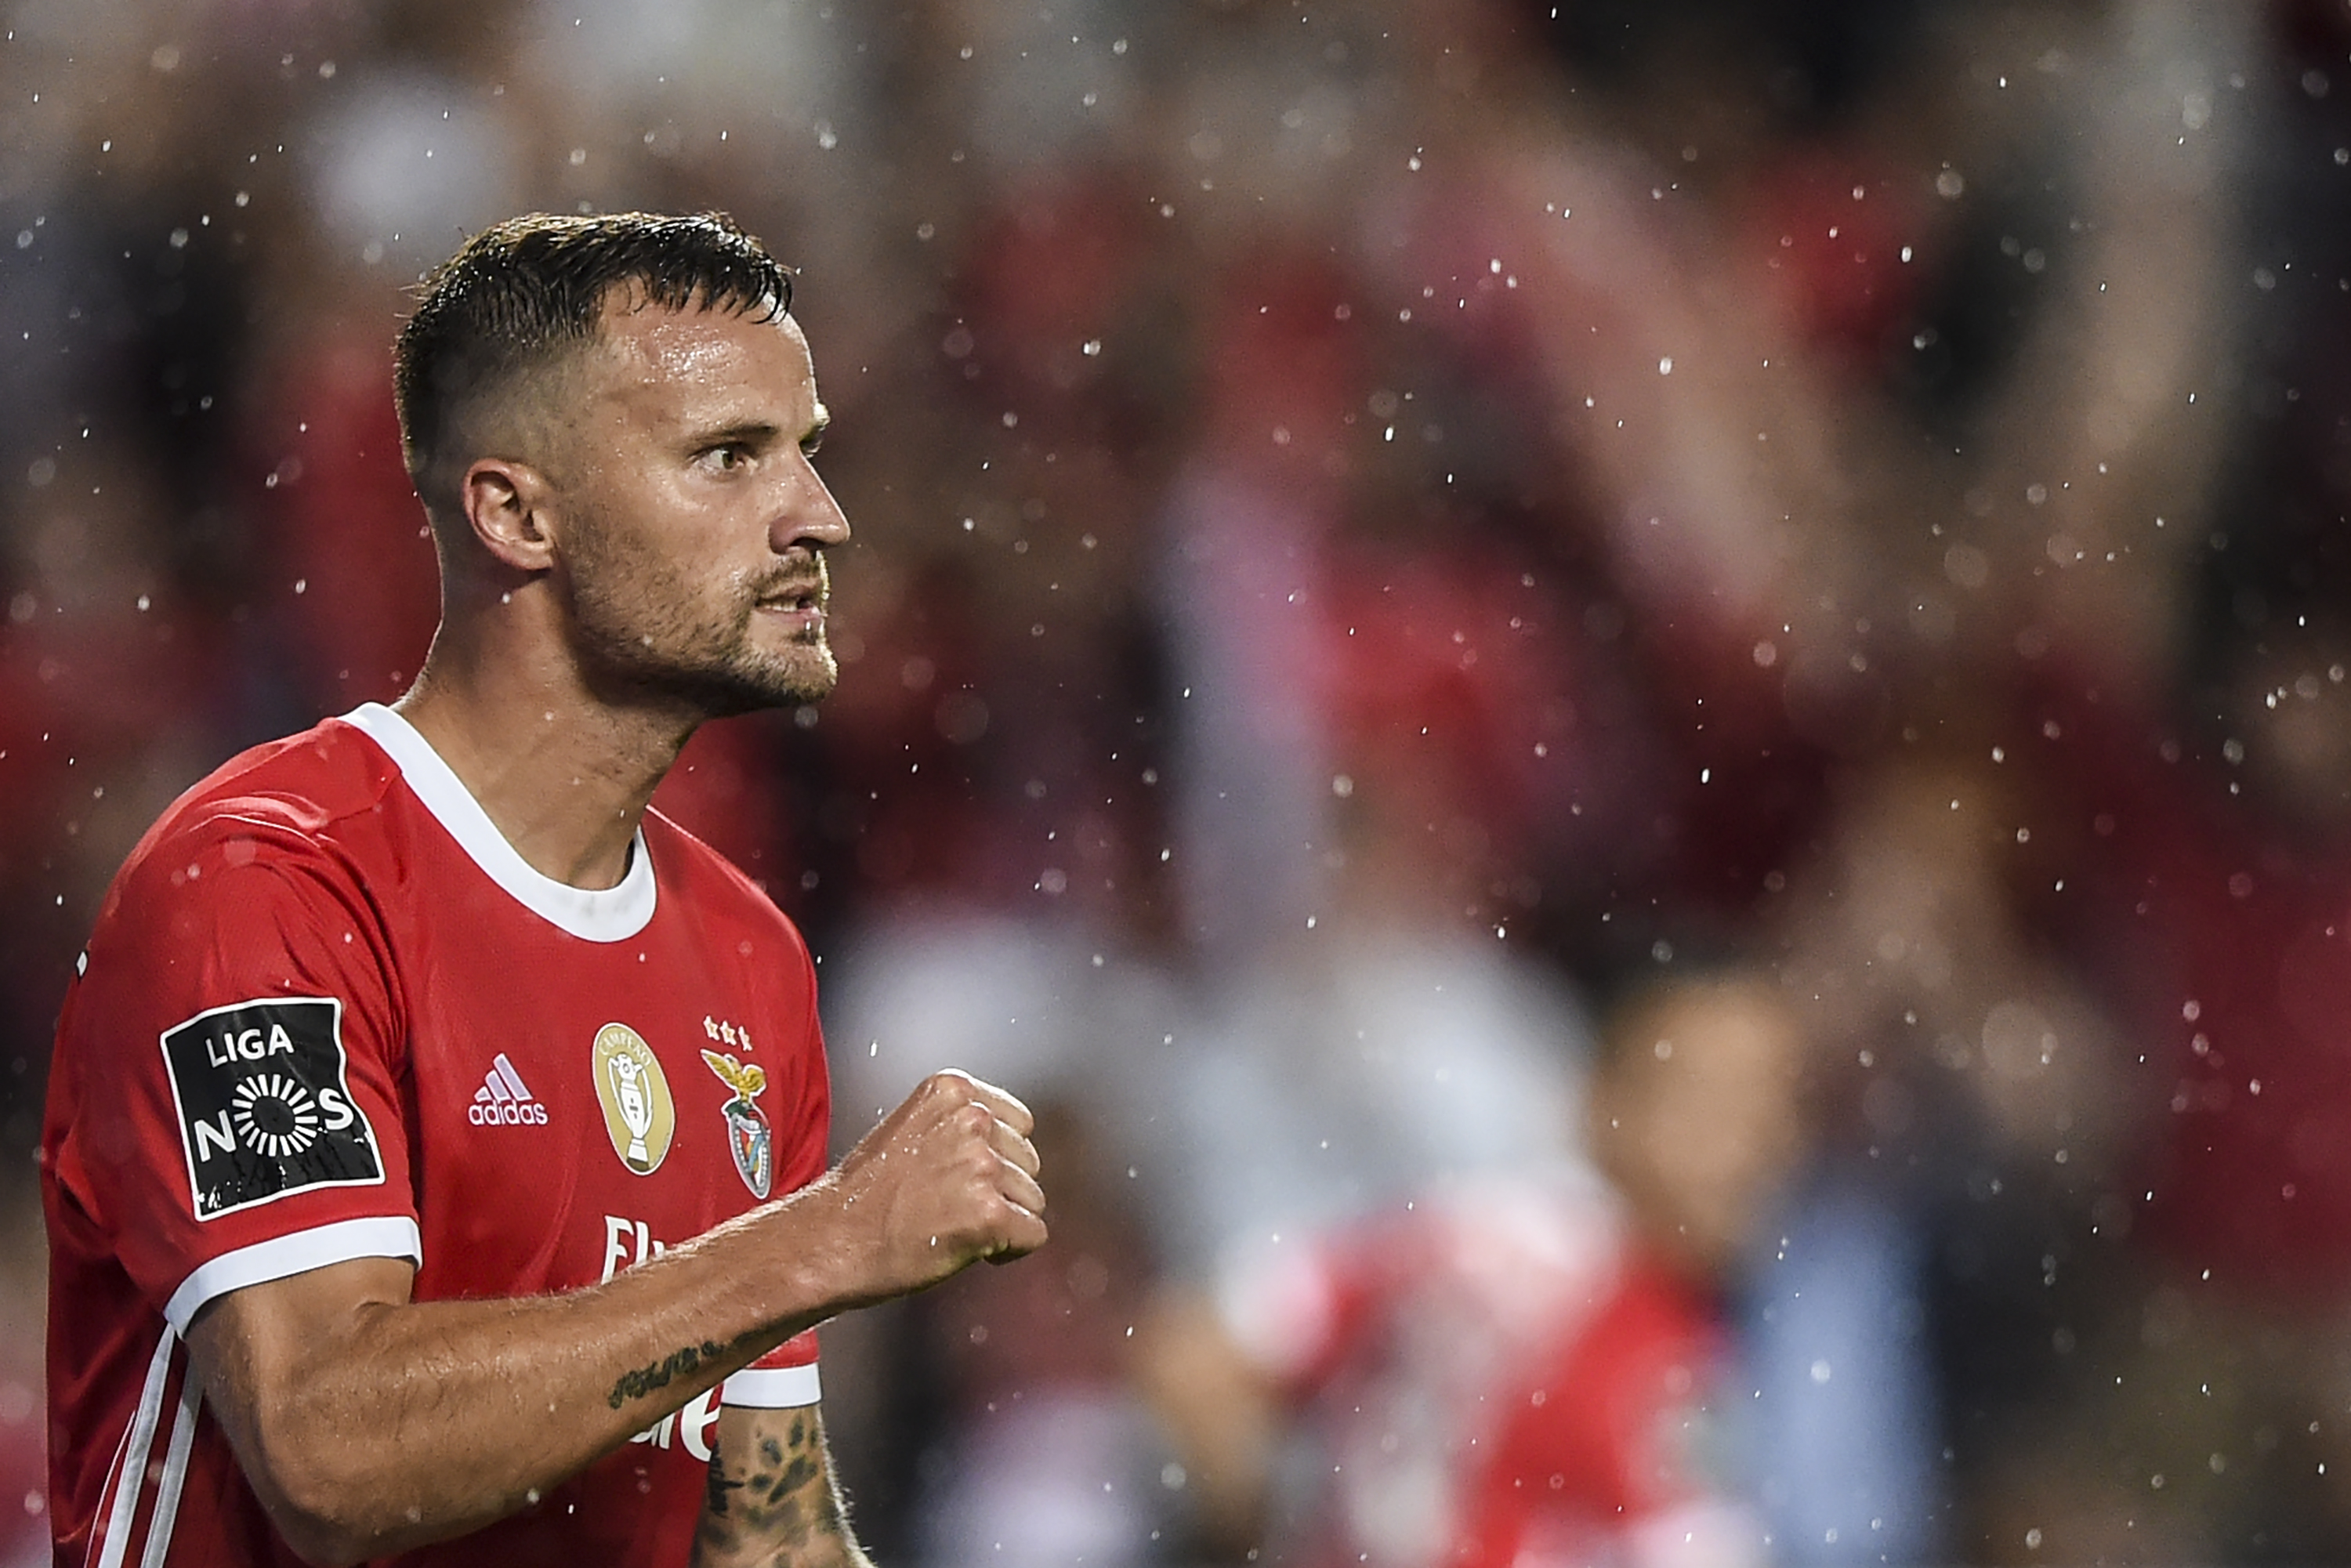 Haris Seferovic could be dropped after underwhelming performances (Photo by PATRICIA DE MELO MOREIRA/AFP/Getty Images)